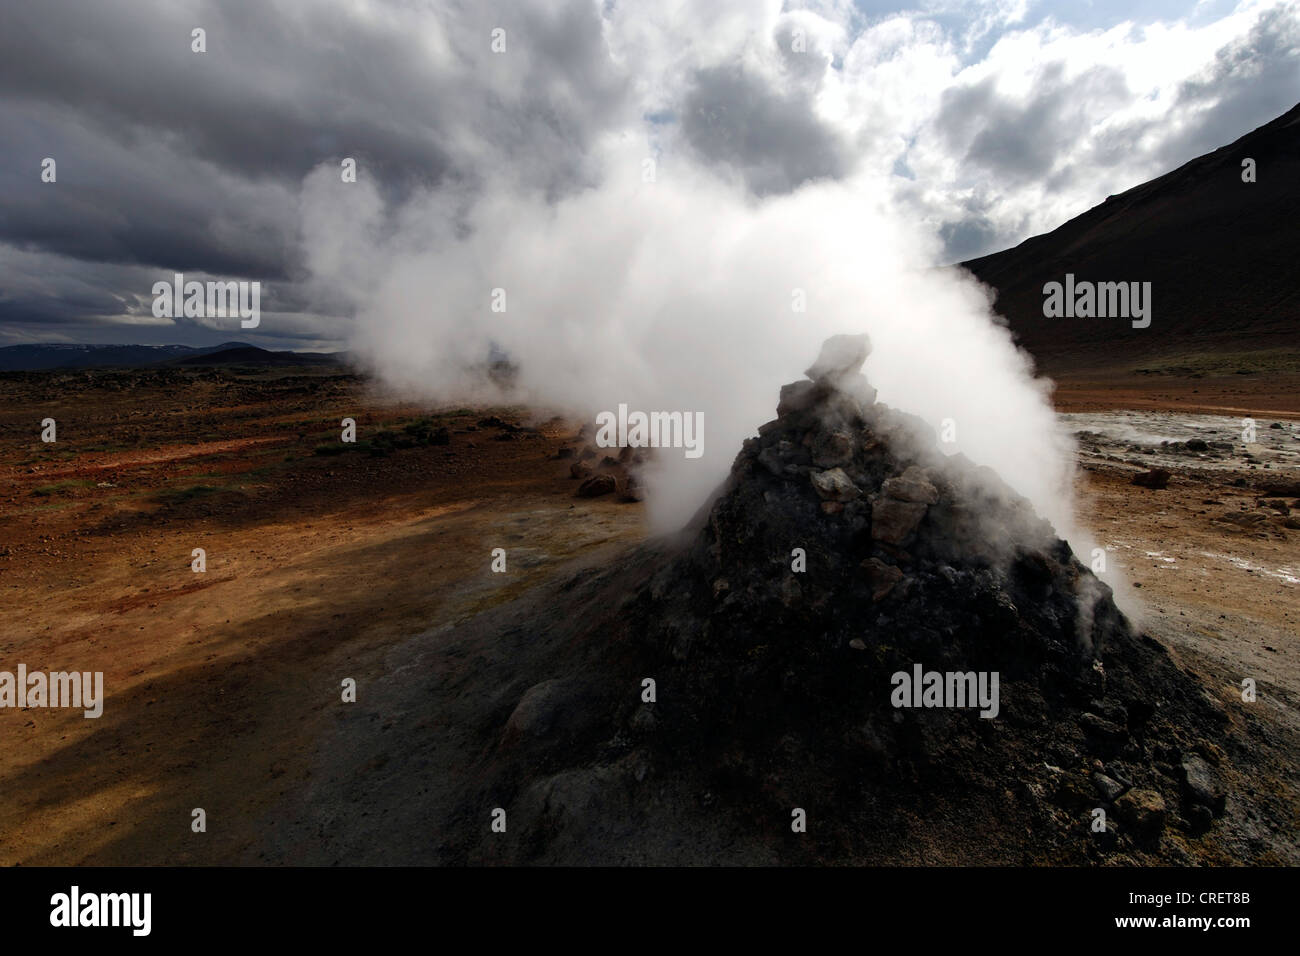 Steaming geothermal vent or fumarole at Hverarond near Myvatn, Iceland Stock Photo